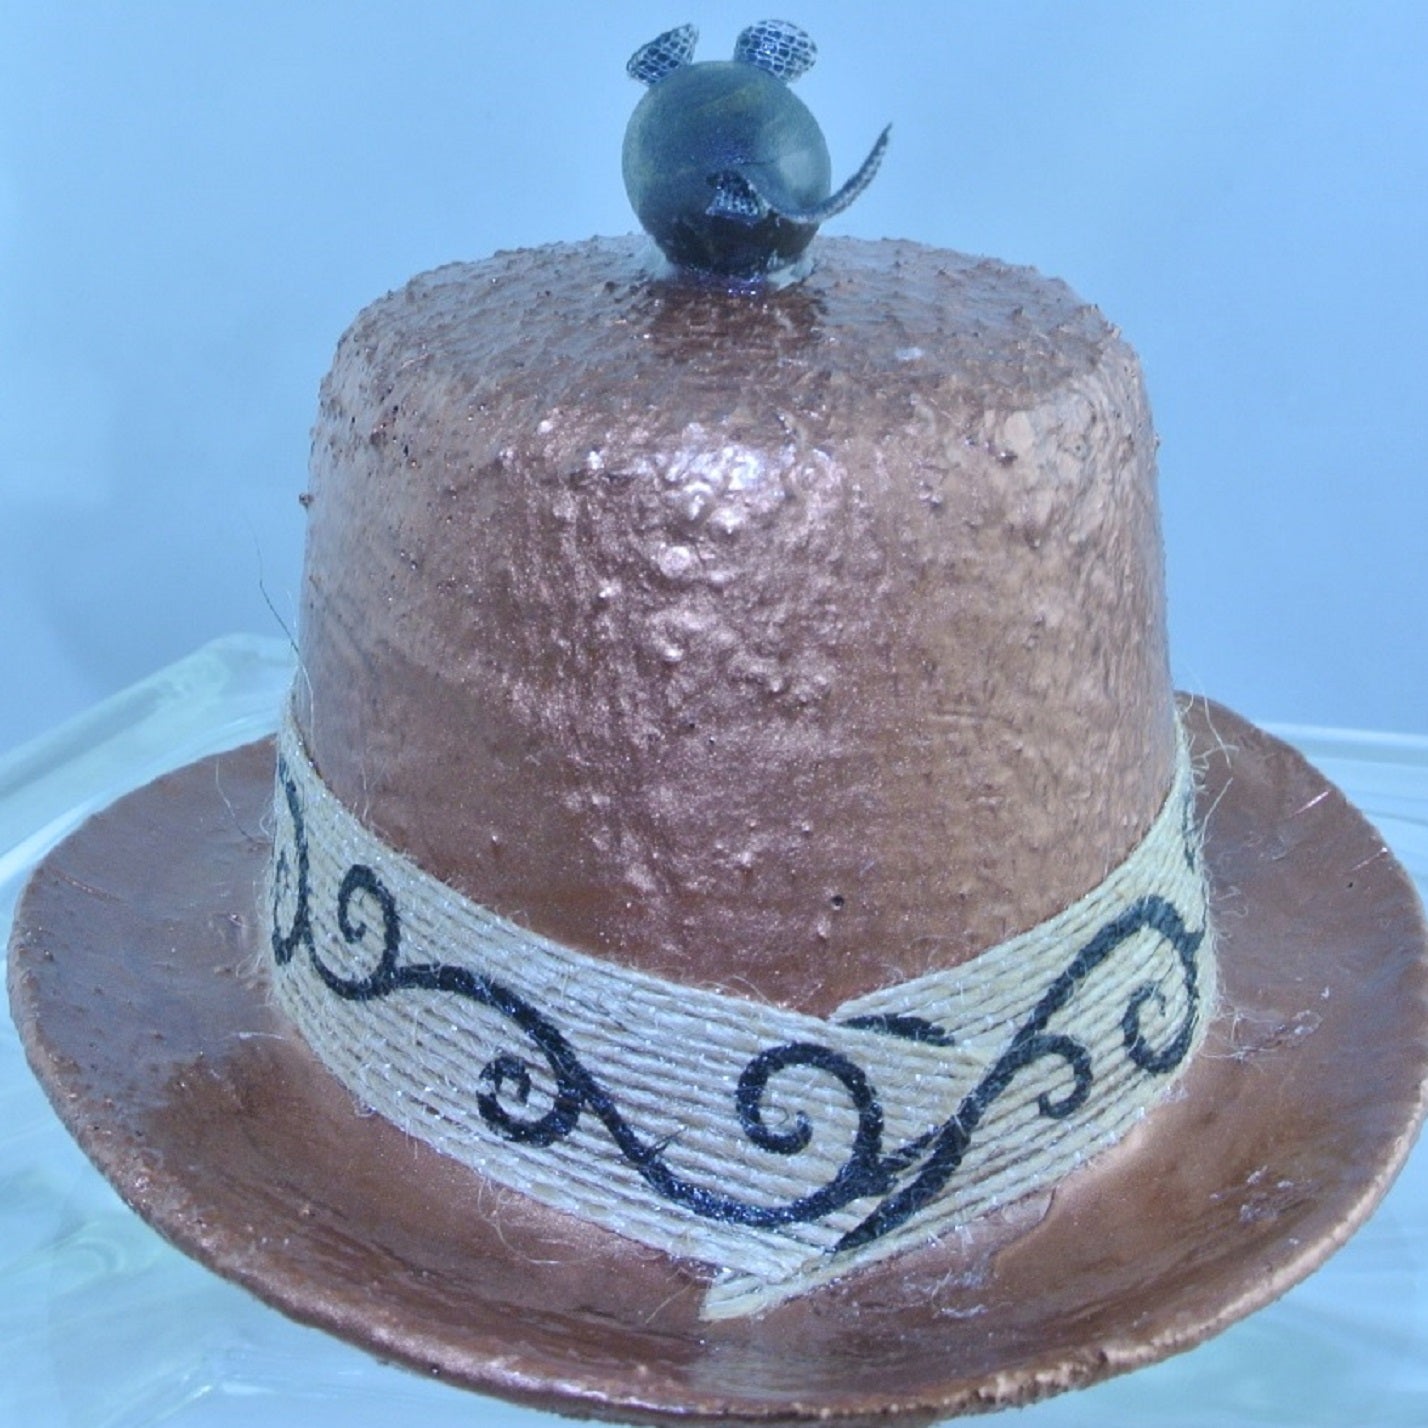 COPPER WOOD MOUSE TOP BURLAP JUTE SWIRL RIBBON BAND XS EXTRA SMALL MINI TOP HAT STARR WILDE STEAMPUNK FORTRESS